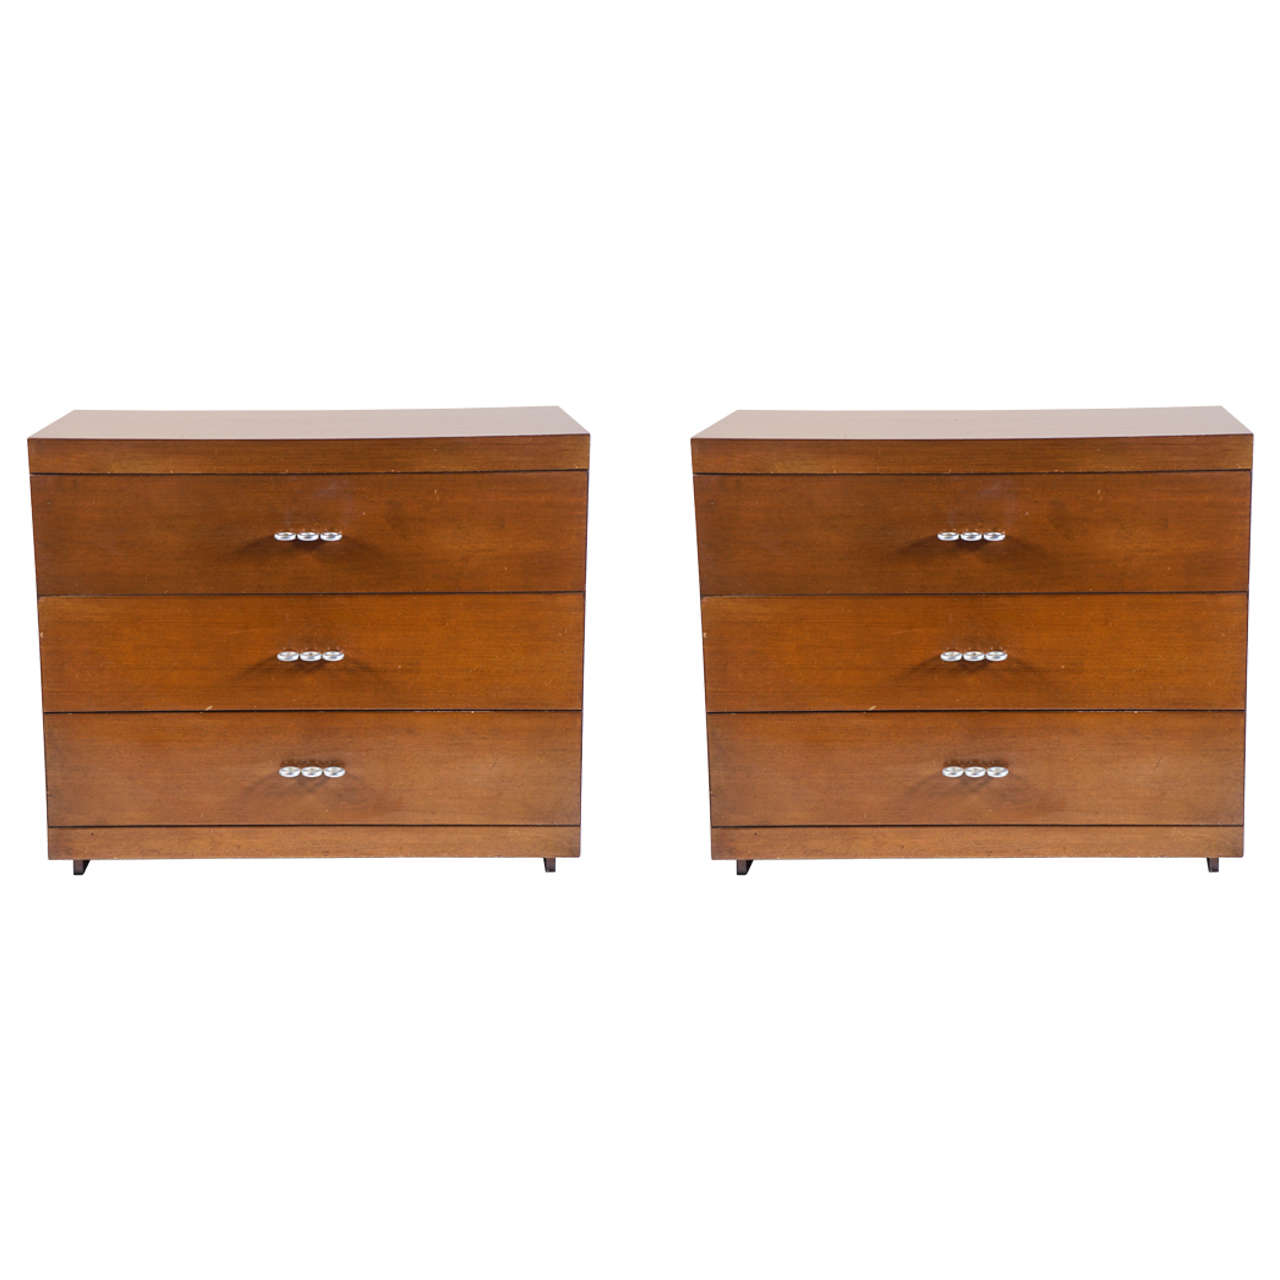 Pair of Dressers or Commodes by Martin Feinman for Winchendon Furniture Co.